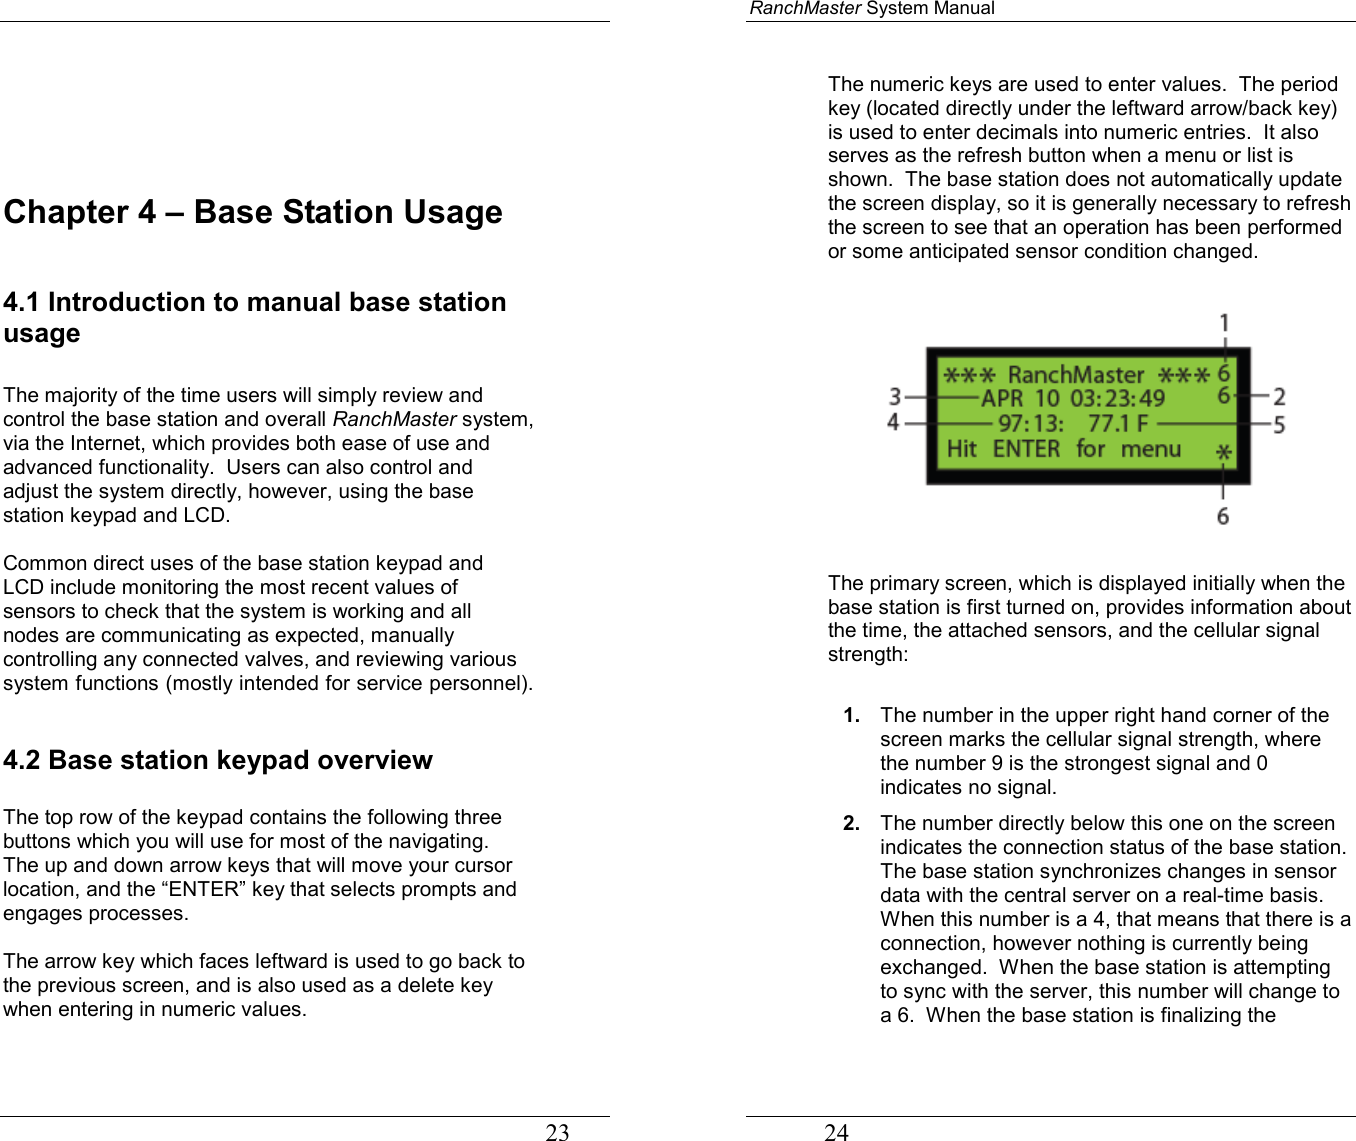                                                                                   23     Chapter 4 – Base Station Usage  4.1 Introduction to manual base station usage  The majority of the time users will simply review and control the base station and overall RanchMaster system, via the Internet, which provides both ease of use and advanced functionality.  Users can also control and adjust the system directly, however, using the base station keypad and LCD.    Common direct uses of the base station keypad and LCD include monitoring the most recent values of sensors to check that the system is working and all nodes are communicating as expected, manually controlling any connected valves, and reviewing various system functions (mostly intended for service personnel).   4.2 Base station keypad overview    The top row of the keypad contains the following three buttons which you will use for most of the navigating.  The up and down arrow keys that will move your cursor location, and the “ENTER” key that selects prompts and engages processes.  The arrow key which faces leftward is used to go back to the previous screen, and is also used as a delete key when entering in numeric values.    RanchMaster System Manual             24 The numeric keys are used to enter values.  The period key (located directly under the leftward arrow/back key) is used to enter decimals into numeric entries.  It also serves as the refresh button when a menu or list is shown.  The base station does not automatically update the screen display, so it is generally necessary to refresh the screen to see that an operation has been performed or some anticipated sensor condition changed.     The primary screen, which is displayed initially when the base station is first turned on, provides information about the time, the attached sensors, and the cellular signal strength:     1.  The number in the upper right hand corner of the screen marks the cellular signal strength, where the number 9 is the strongest signal and 0 indicates no signal. 2.  The number directly below this one on the screen indicates the connection status of the base station. The base station synchronizes changes in sensor data with the central server on a real-time basis.  When this number is a 4, that means that there is a connection, however nothing is currently being exchanged.  When the base station is attempting to sync with the server, this number will change to a 6.  When the base station is finalizing the 